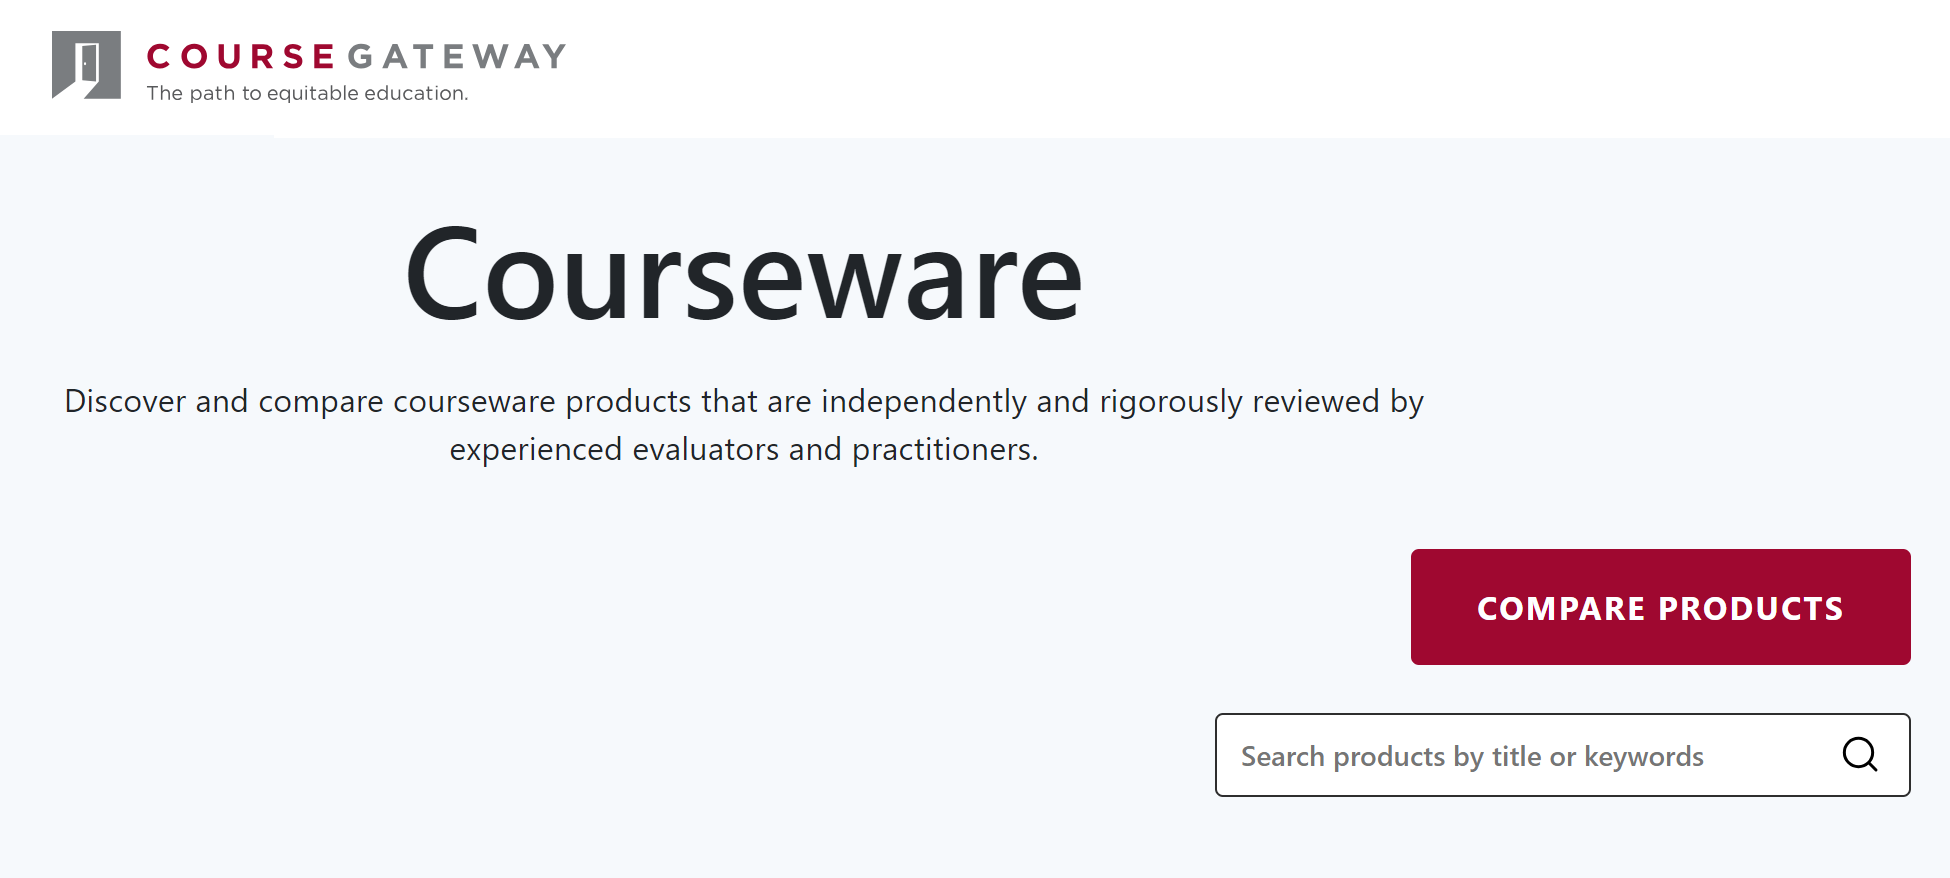 CourseGateway | Courseware: Discover and compare courseware products that are independently and rigorously reviewed by experienced evaluators and practitioners.